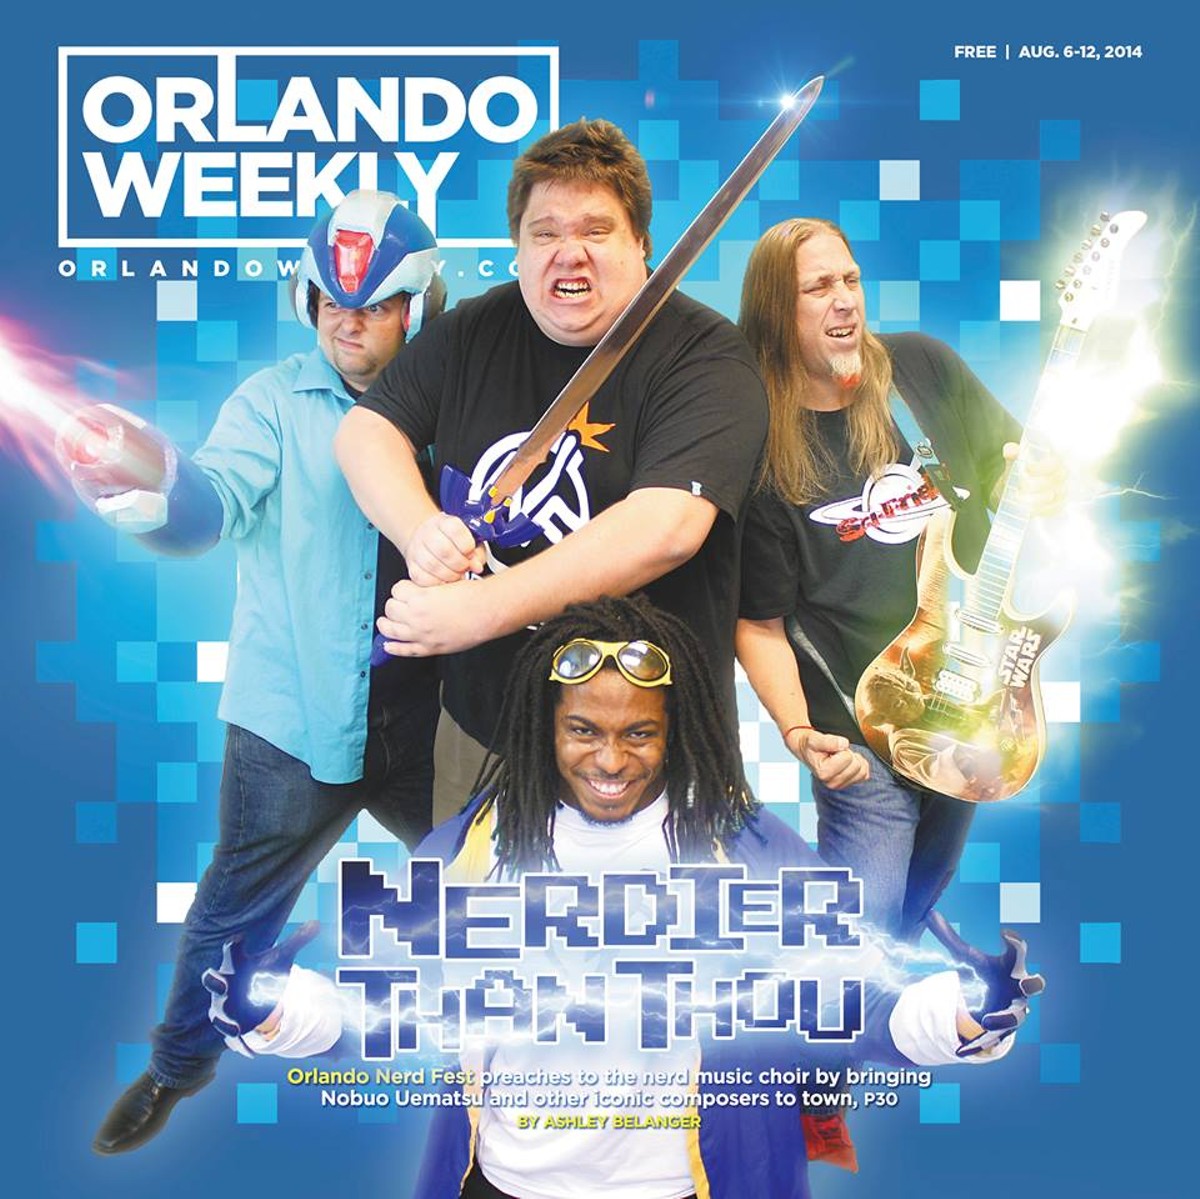 Best of Orlando 2014 Issue Cover